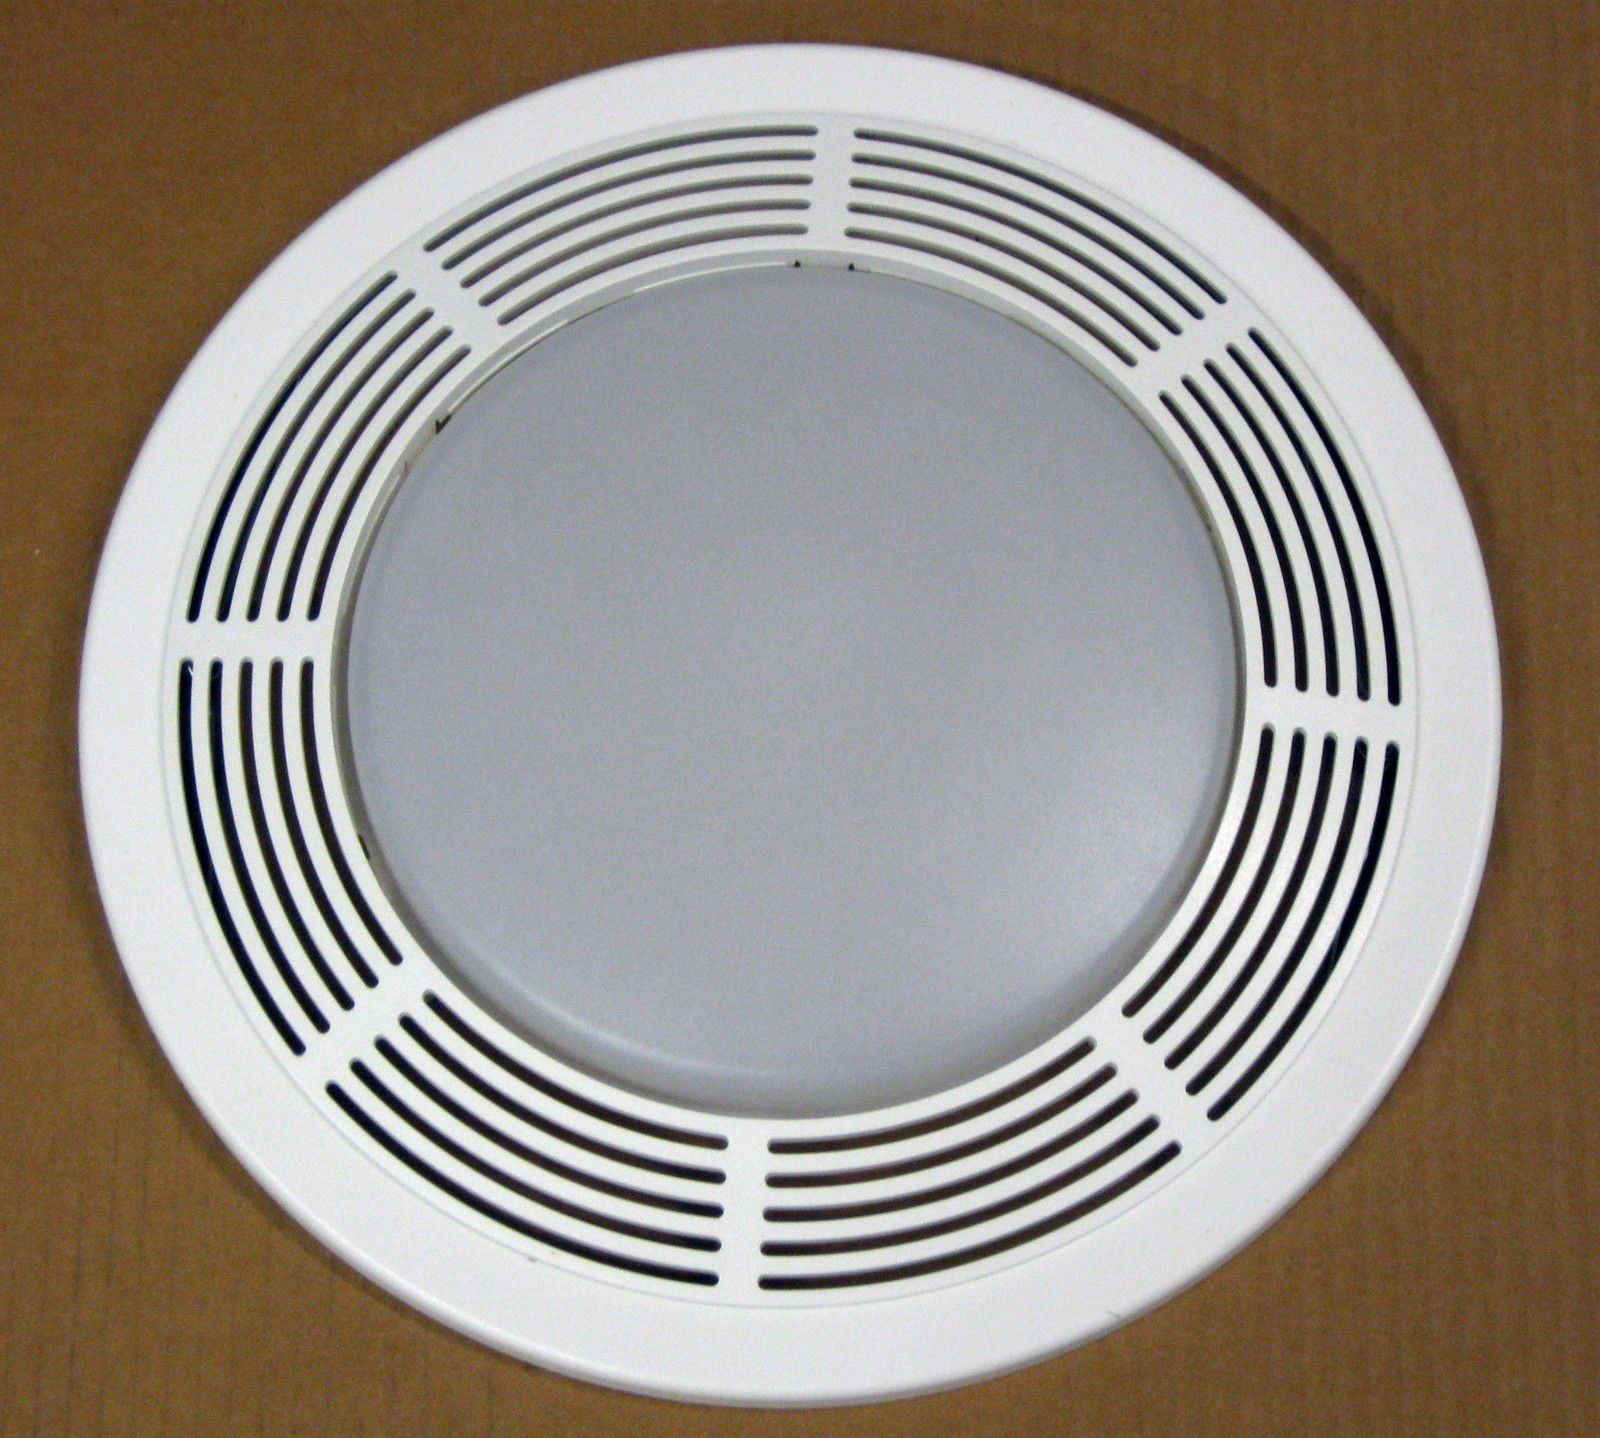 Details About S97017702 Broan Nutone Grille And Lens Assembly For 8663rp Fan Unit New throughout sizing 1600 X 1438